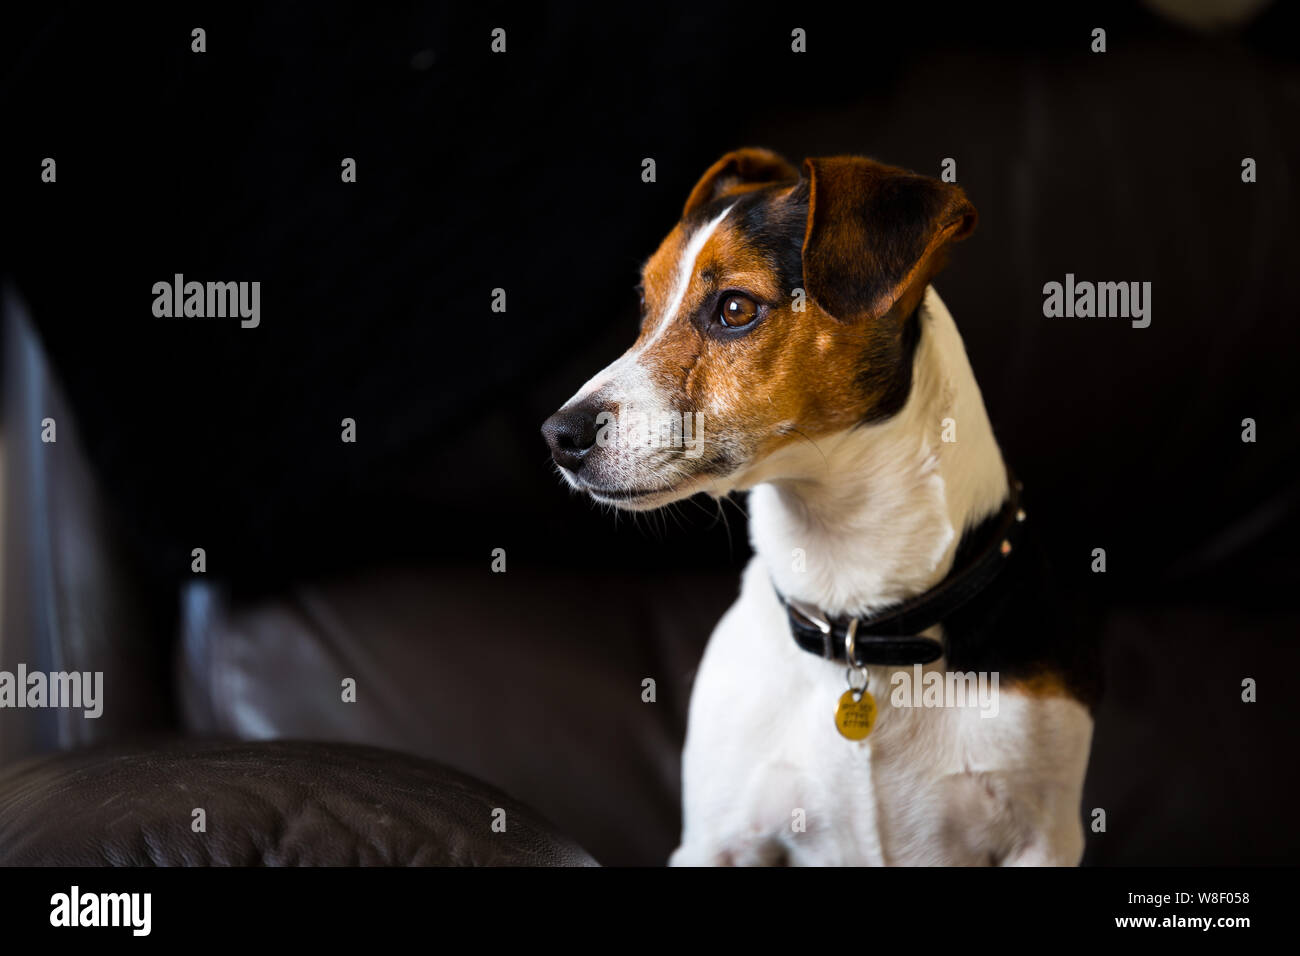 Portrait of a brown/white/black Jack Russell. He is looking off camera to the left with bright window light lighting his face Stock Photo